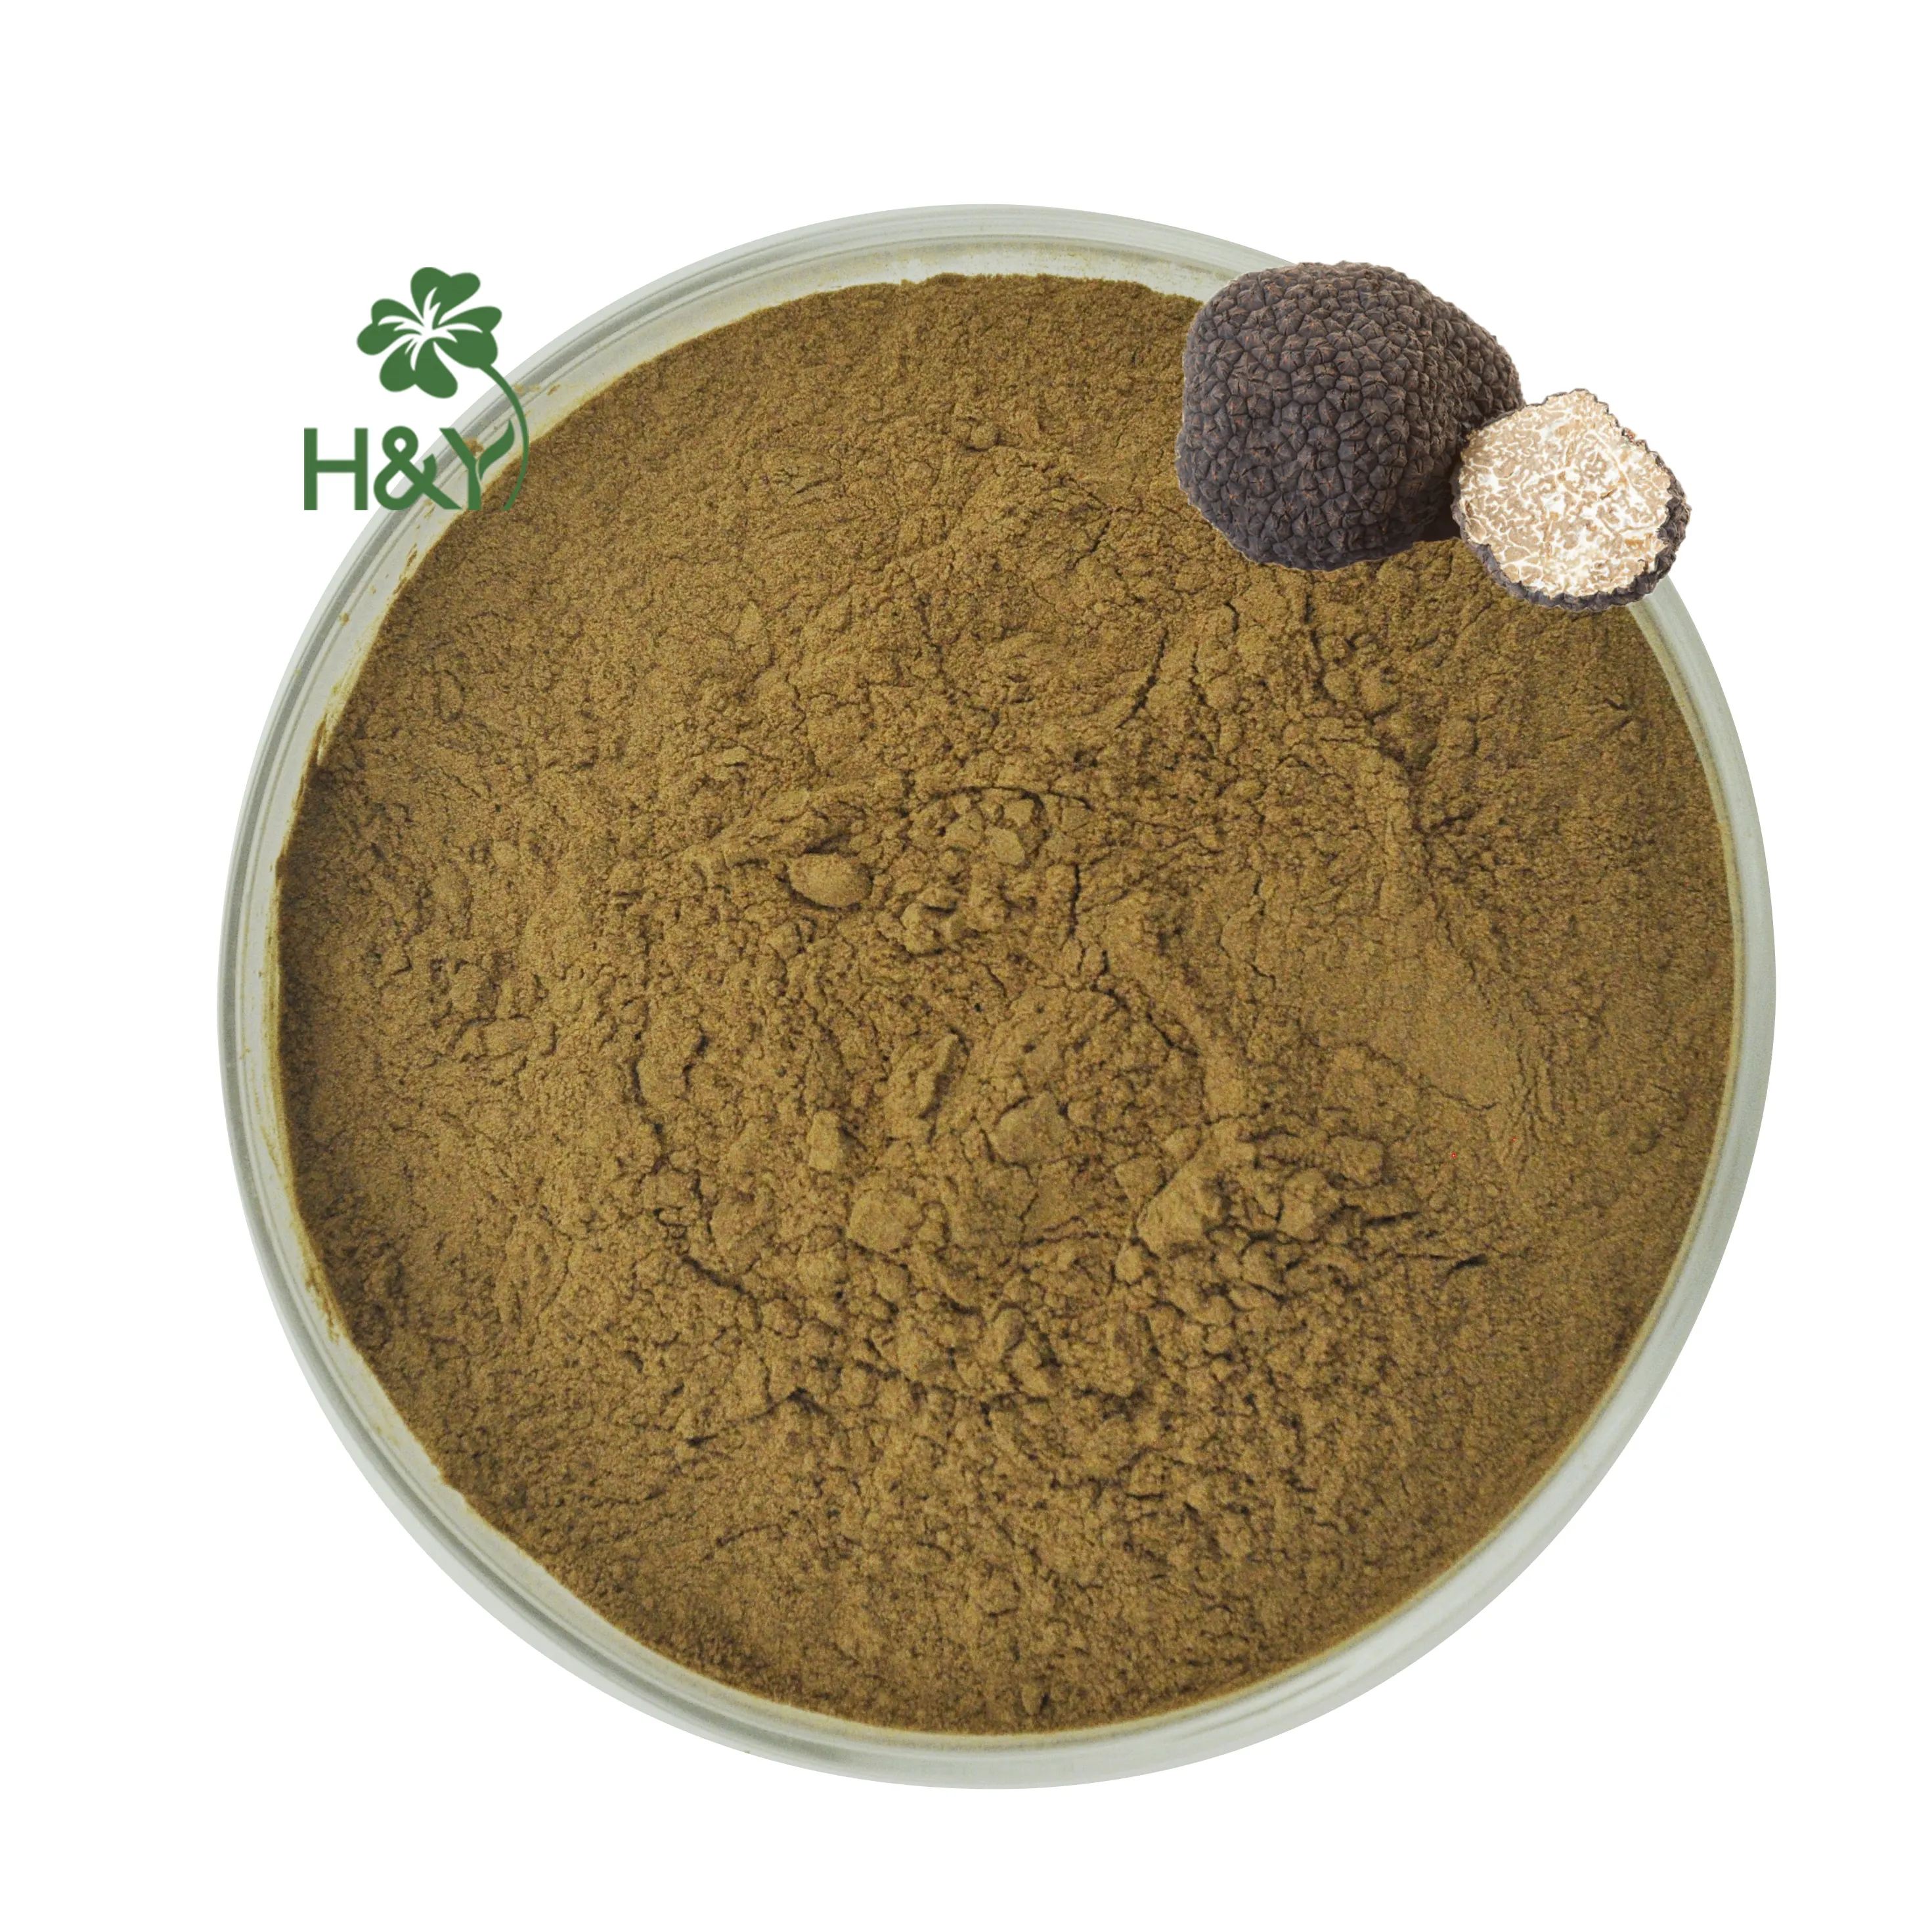 Wholesale Food Raw Material Black Truffle Extract 10:1 Truffle Extract Powder